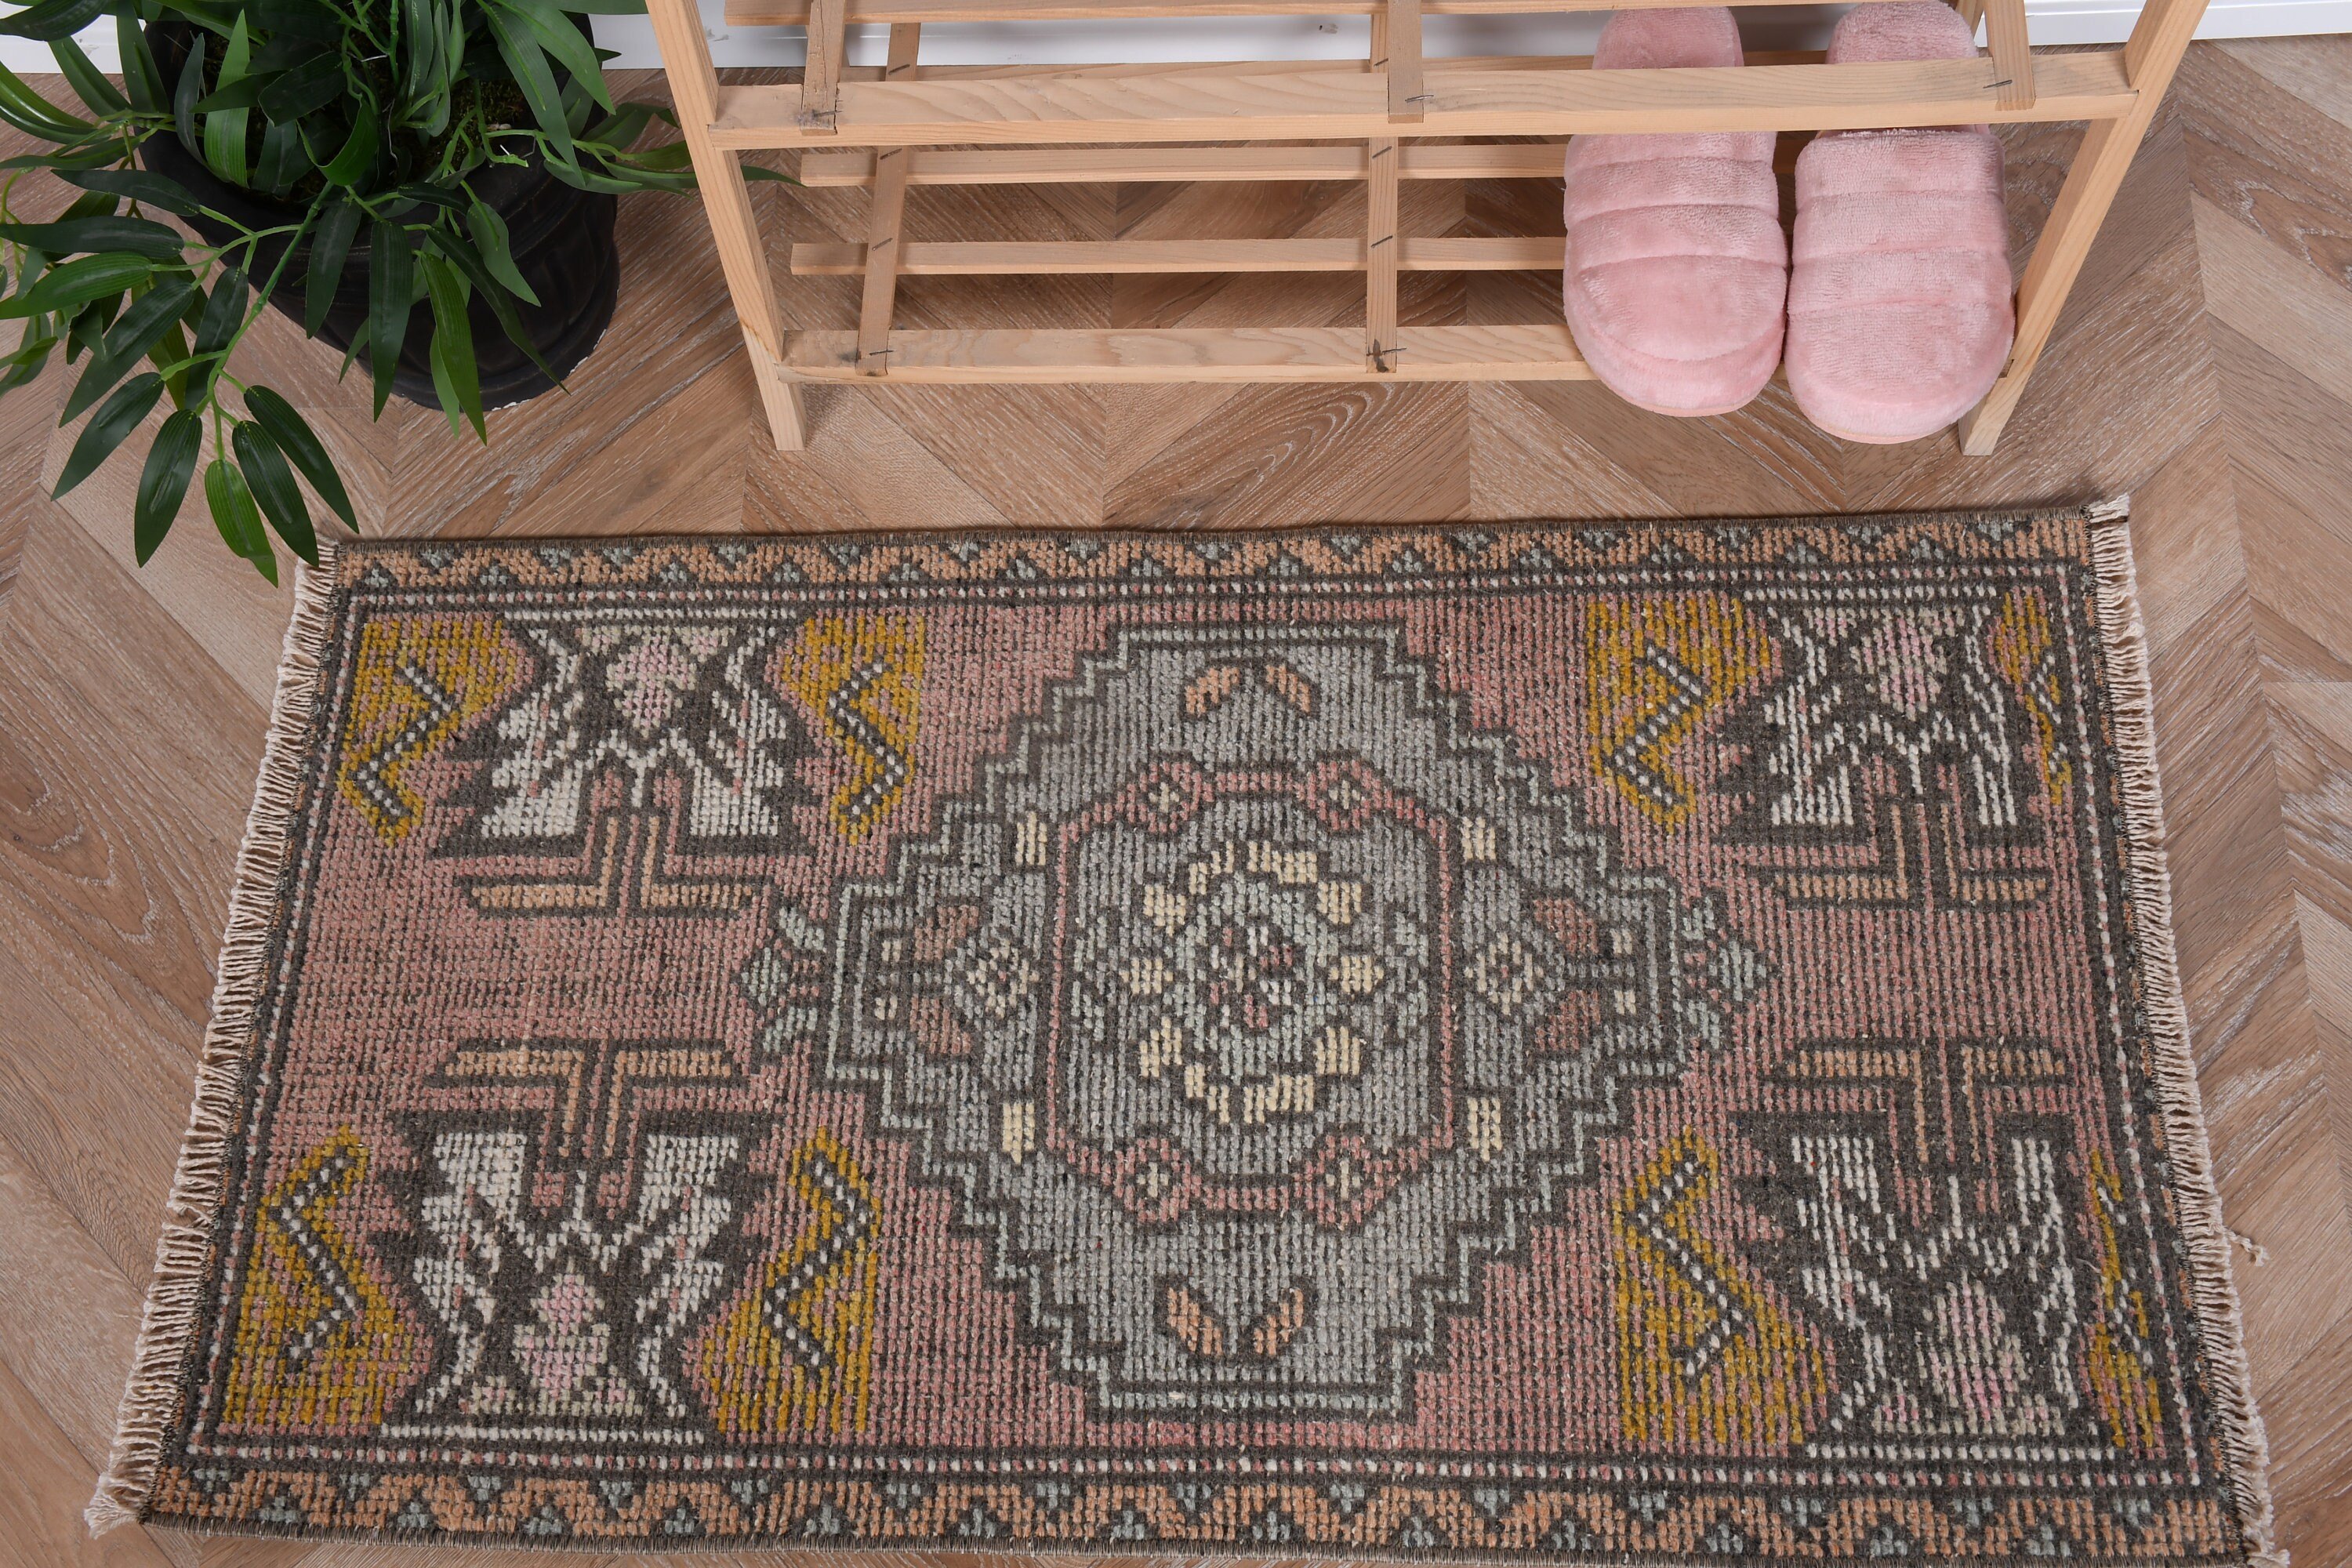 Kitchen Rugs, Turkish Rugs, Pink Cool Rug, Entry Rug, Floor Rugs, Vintage Rug, 1.7x3 ft Small Rug, Rugs for Entry, Hand Woven Rug, Bath Rug